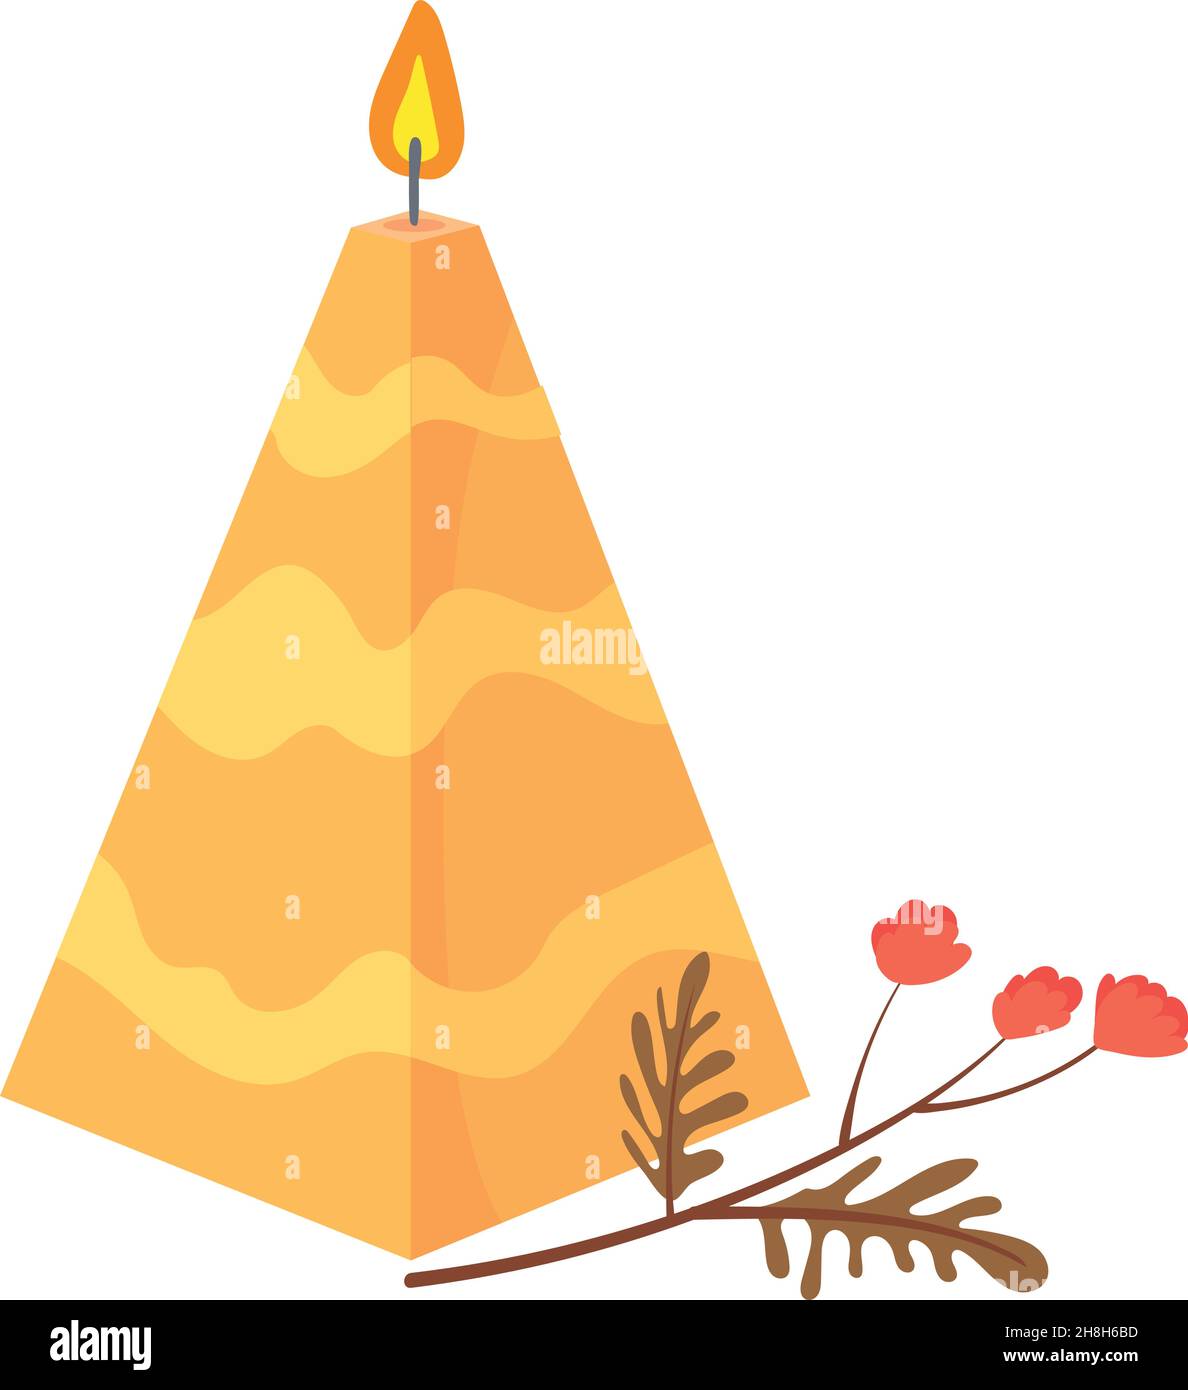 Pyramid yellow candle. Sumbol religion church, style vector illustration isolated on white background Stock Vector